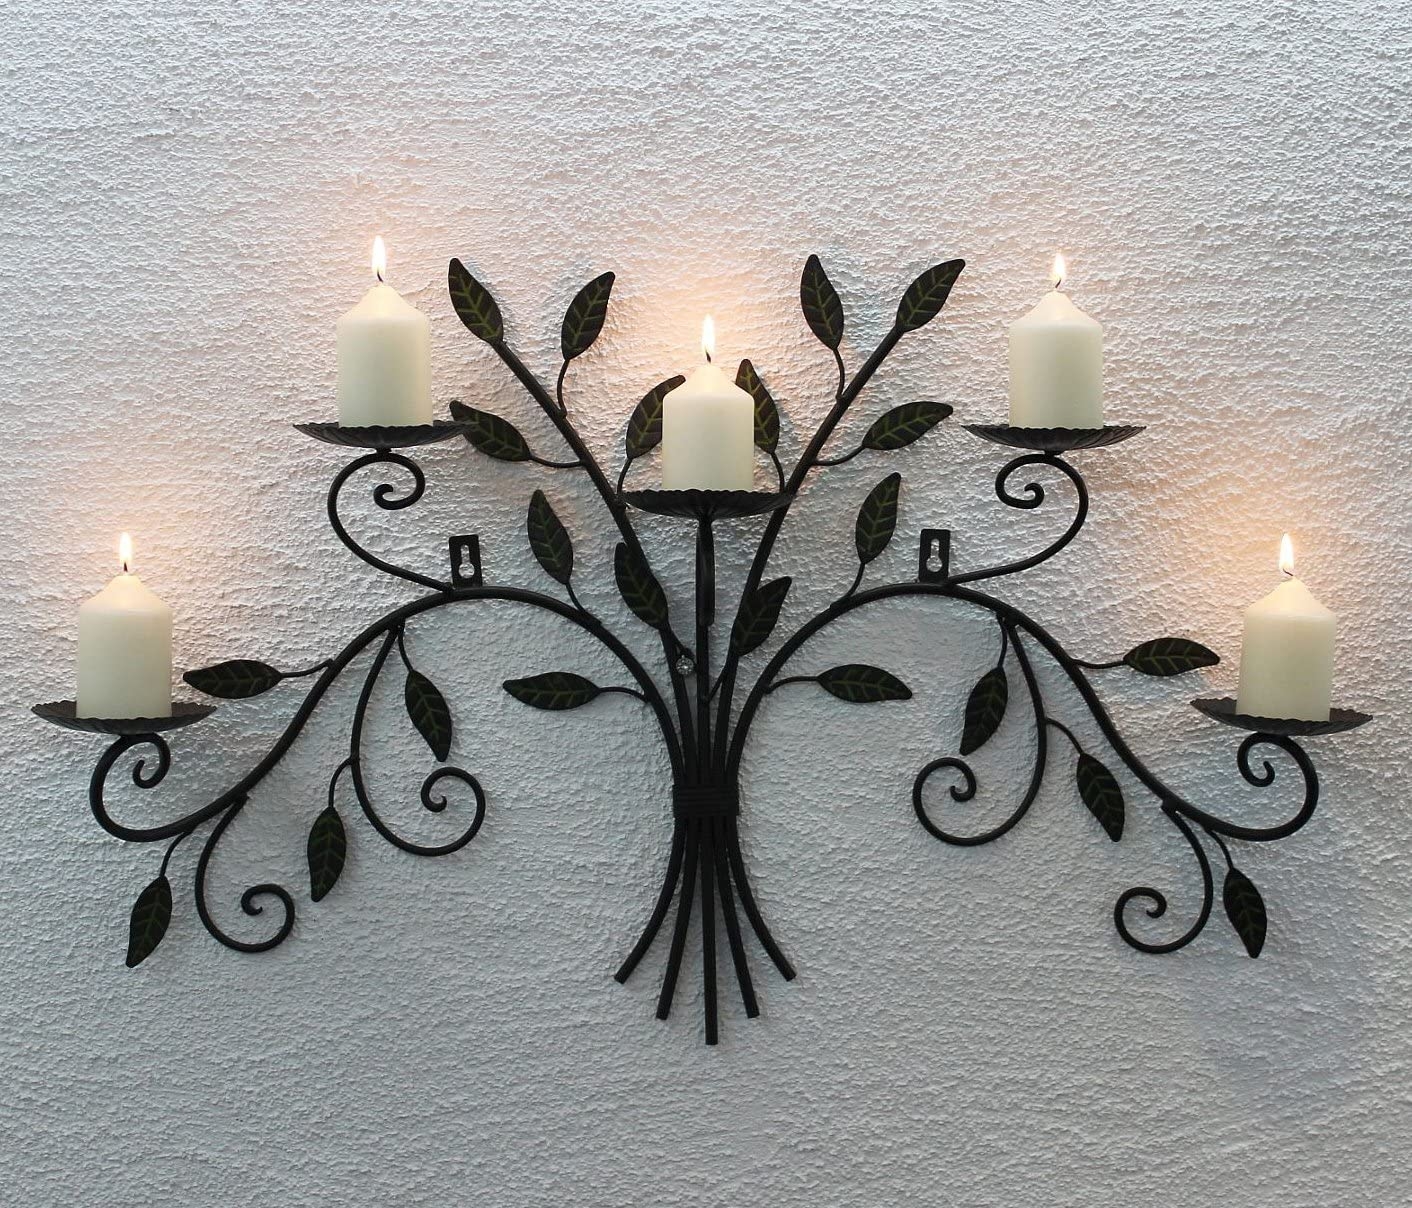 2 RUSTIC CAST IRON CANDLE HOLDERS WALL MOUNTED DECORATIVE PURPOSES ONLY 